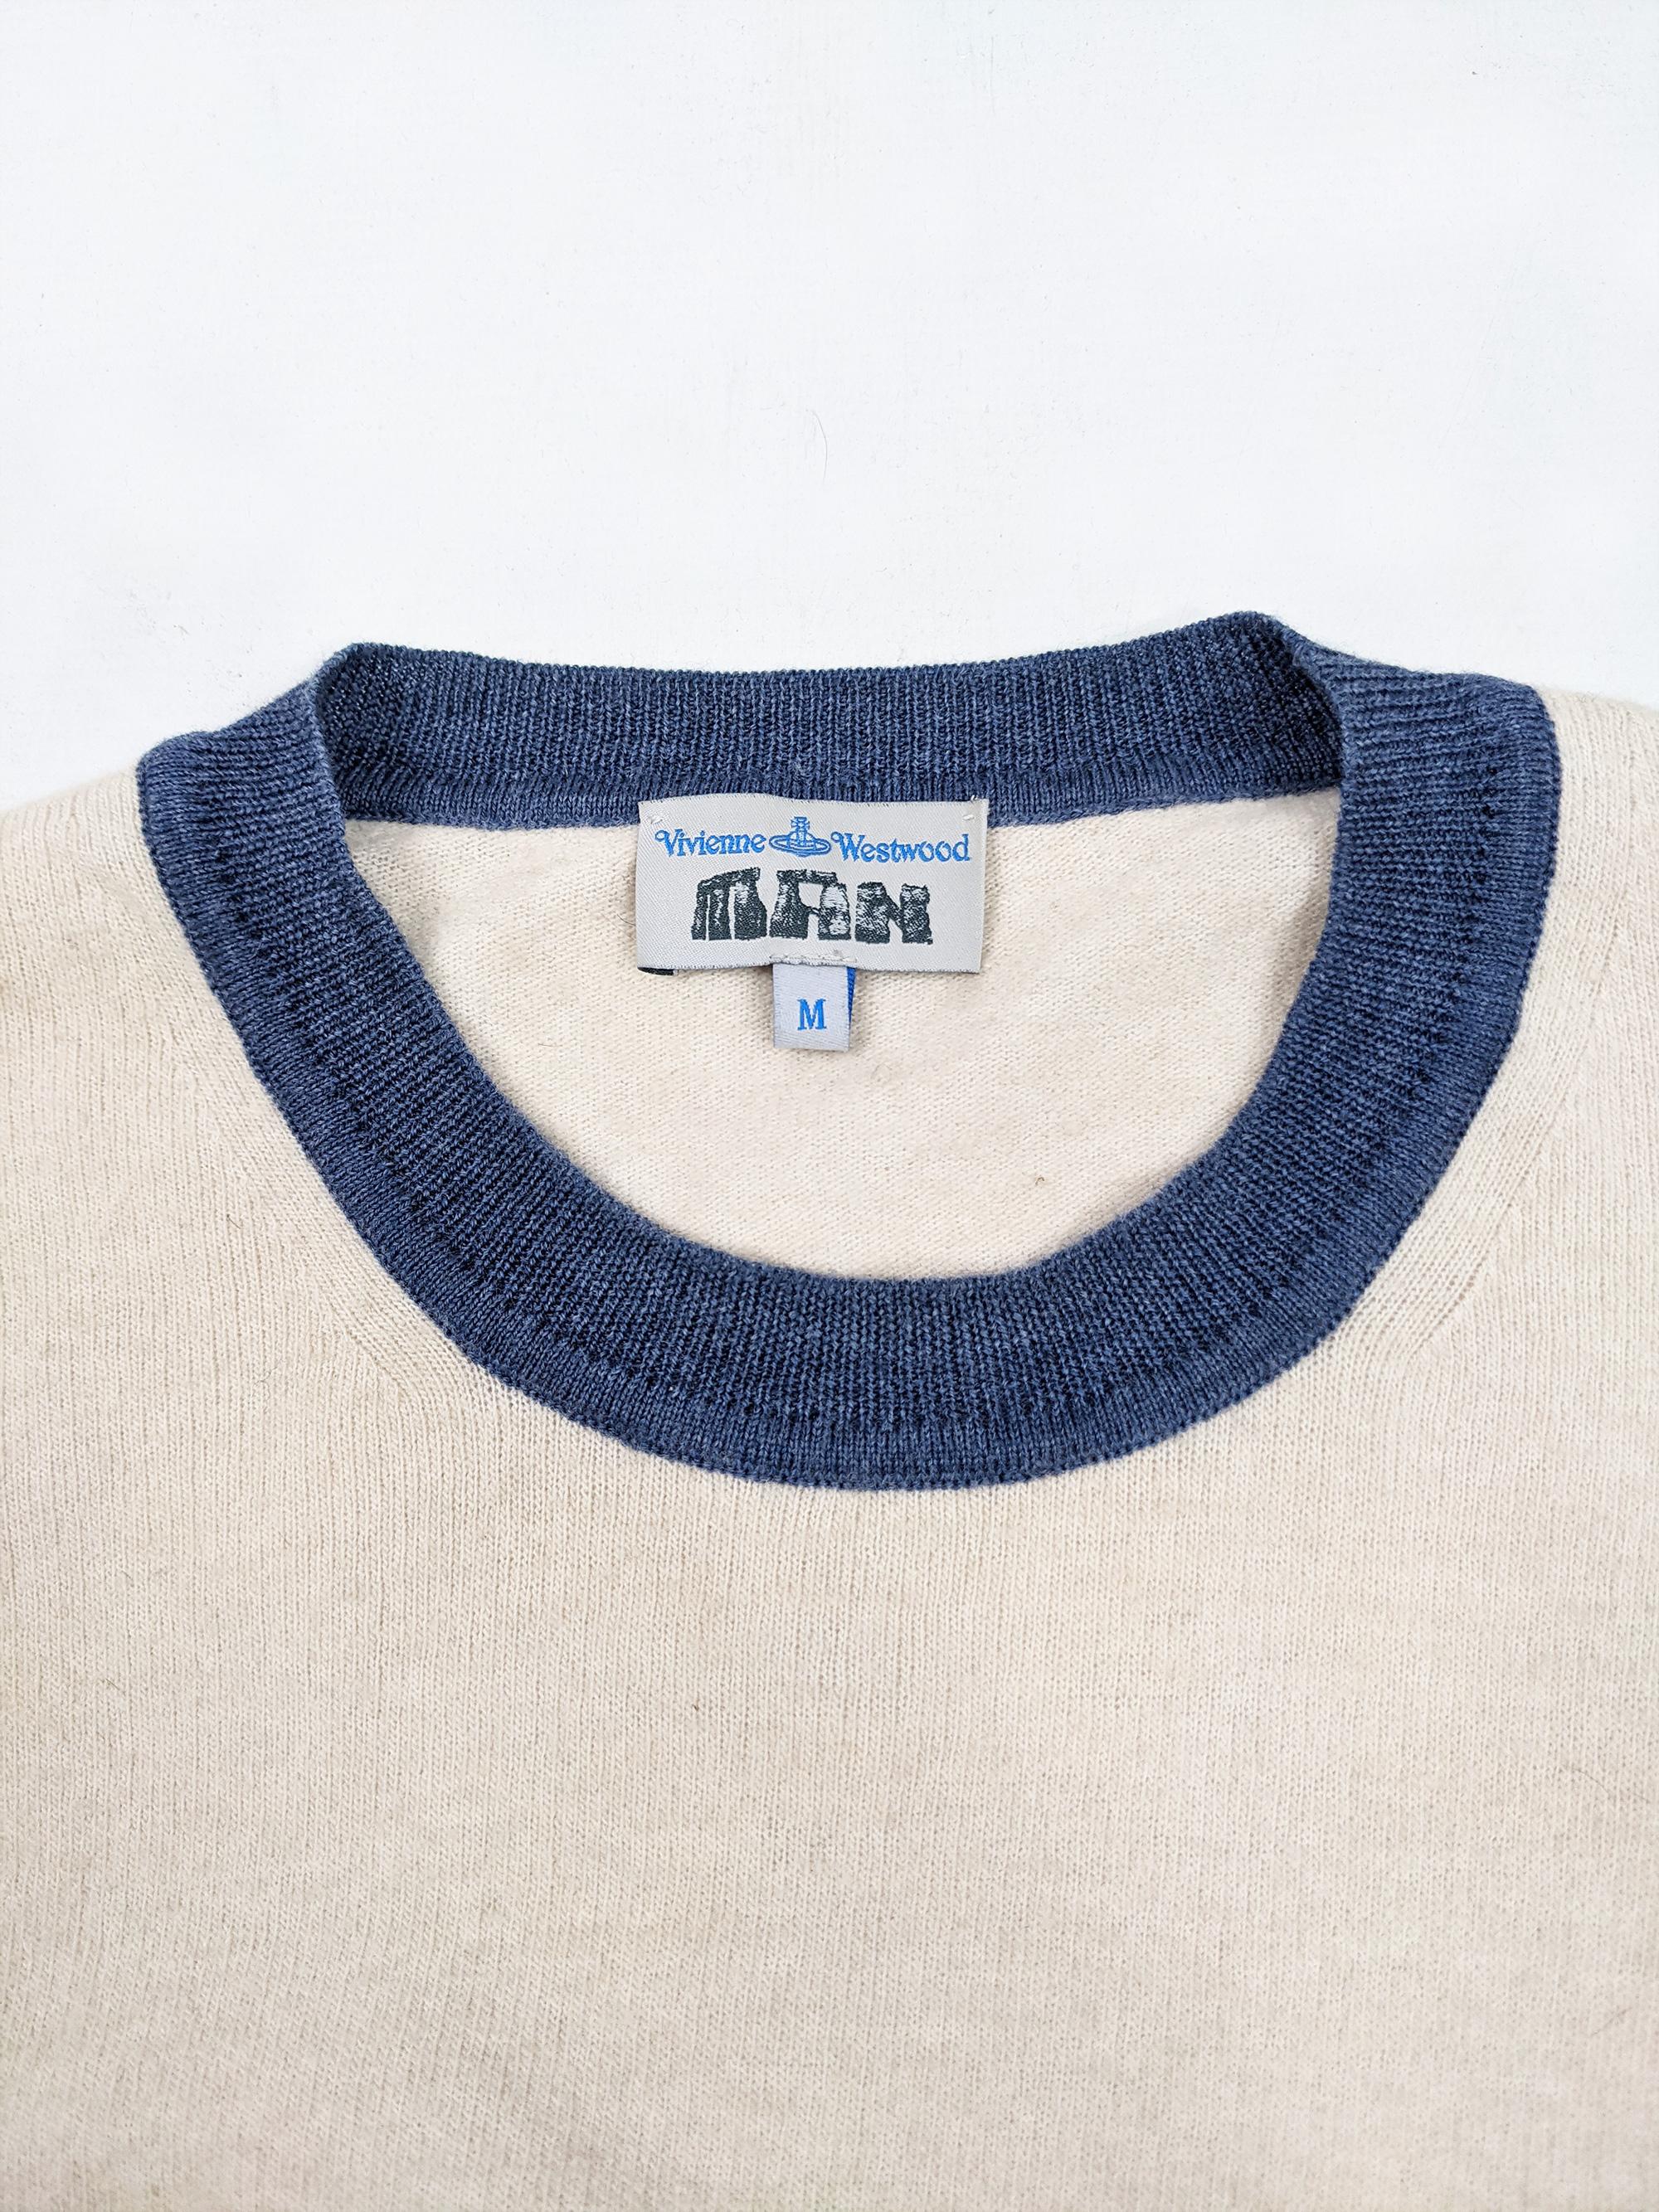 Vivienne Westwood Mens Blue & Cream Knit Jumper Sweater In Good Condition In Doncaster, South Yorkshire